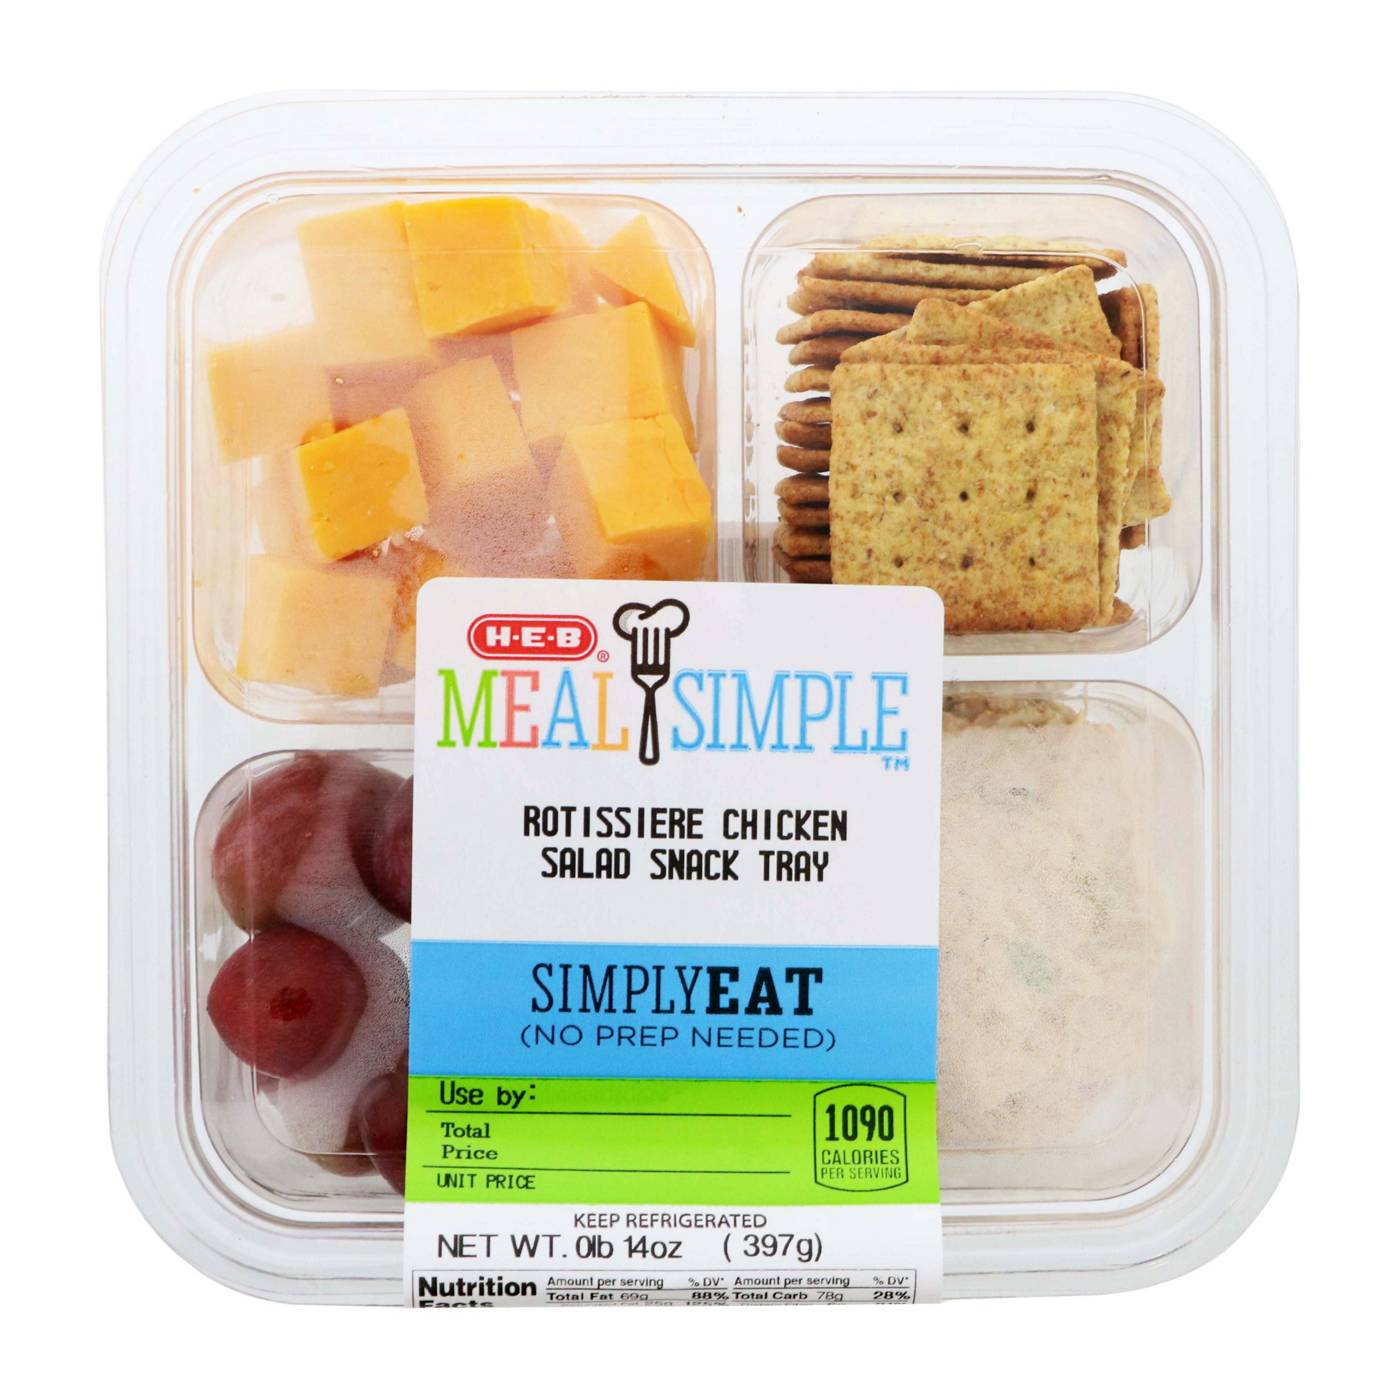 Meal Simple by H-E-B Snack Tray - Rotisserie Chicken Salad & Cheese; image 3 of 3